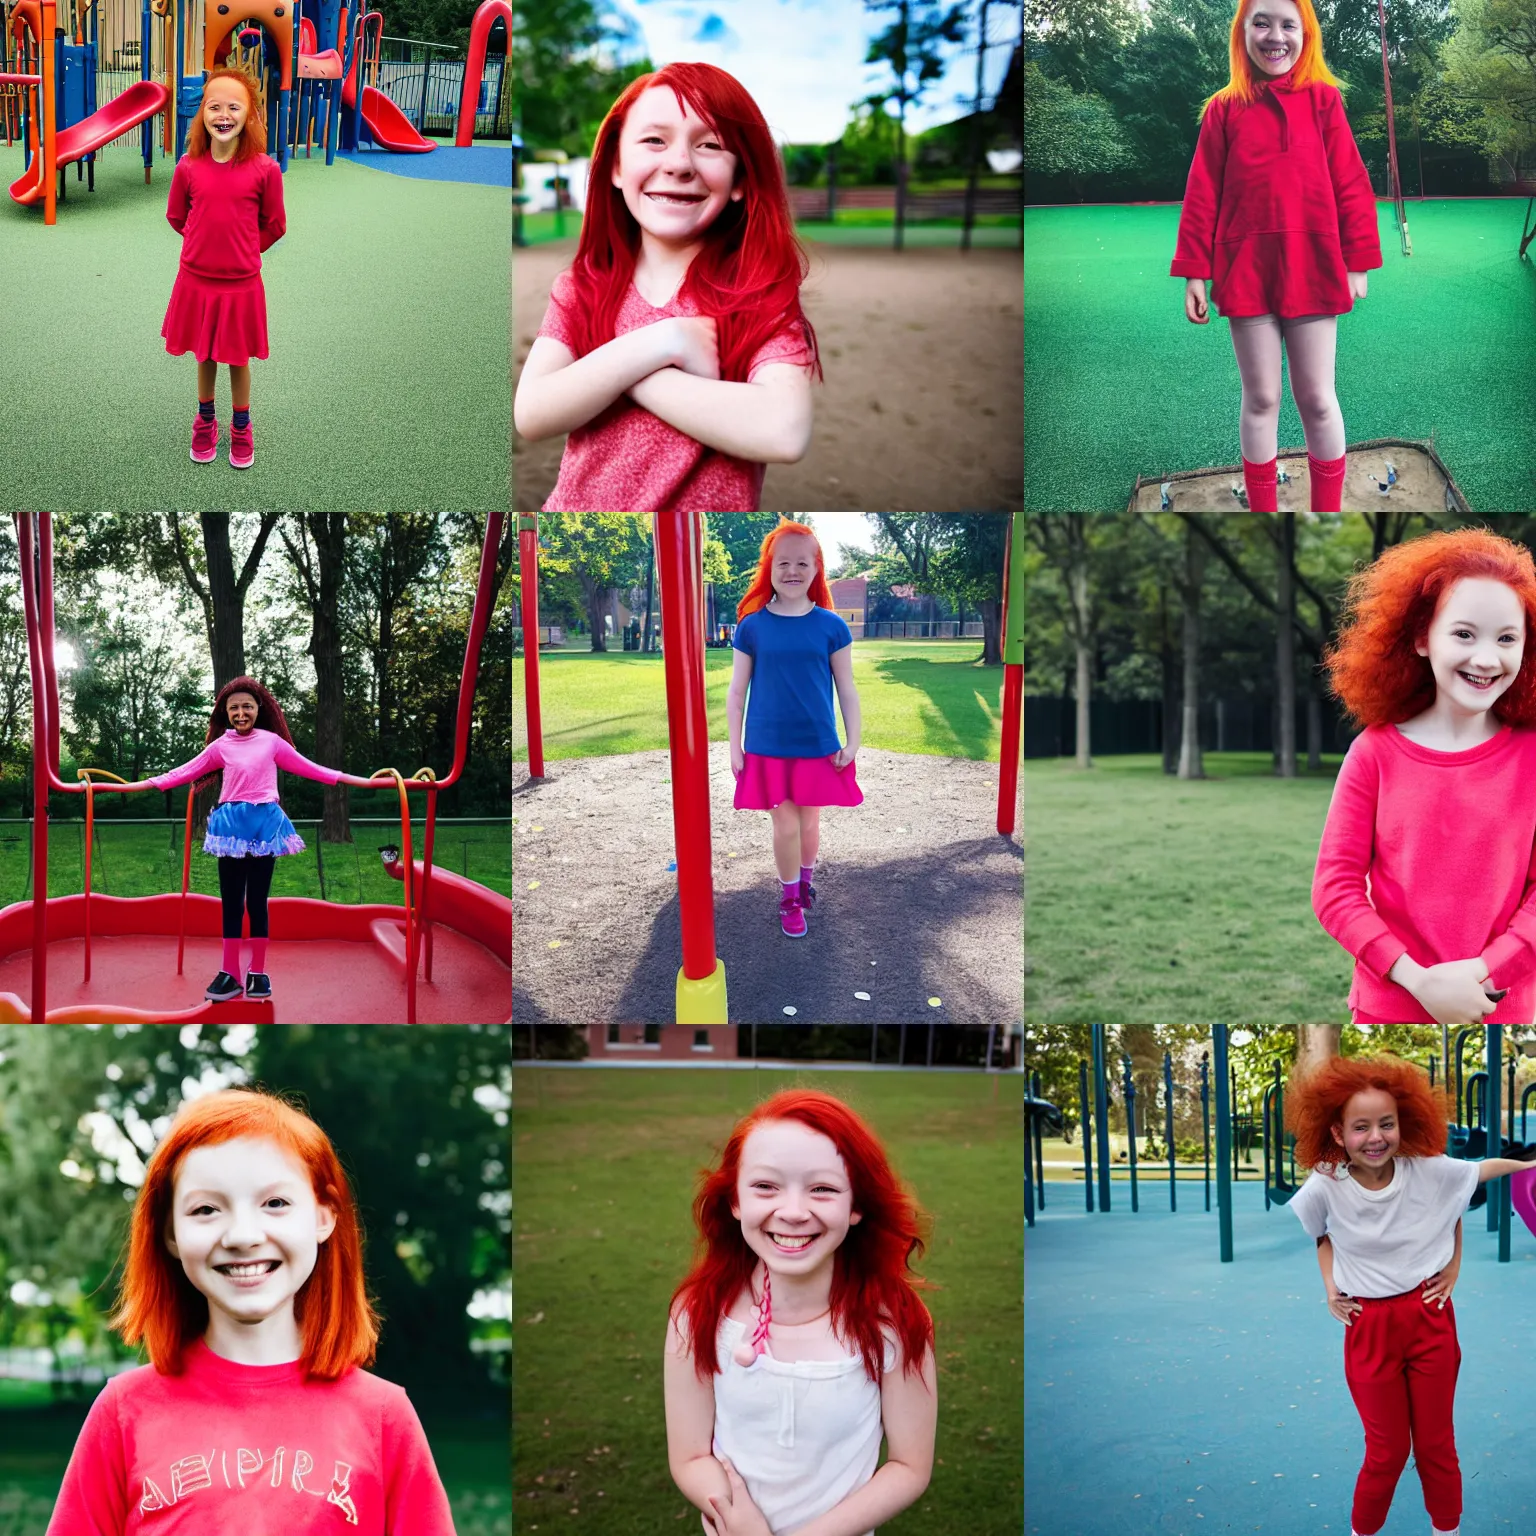 Prompt: a photograph of a happy ten year old girl standing alone in a playground, red hair, smiling